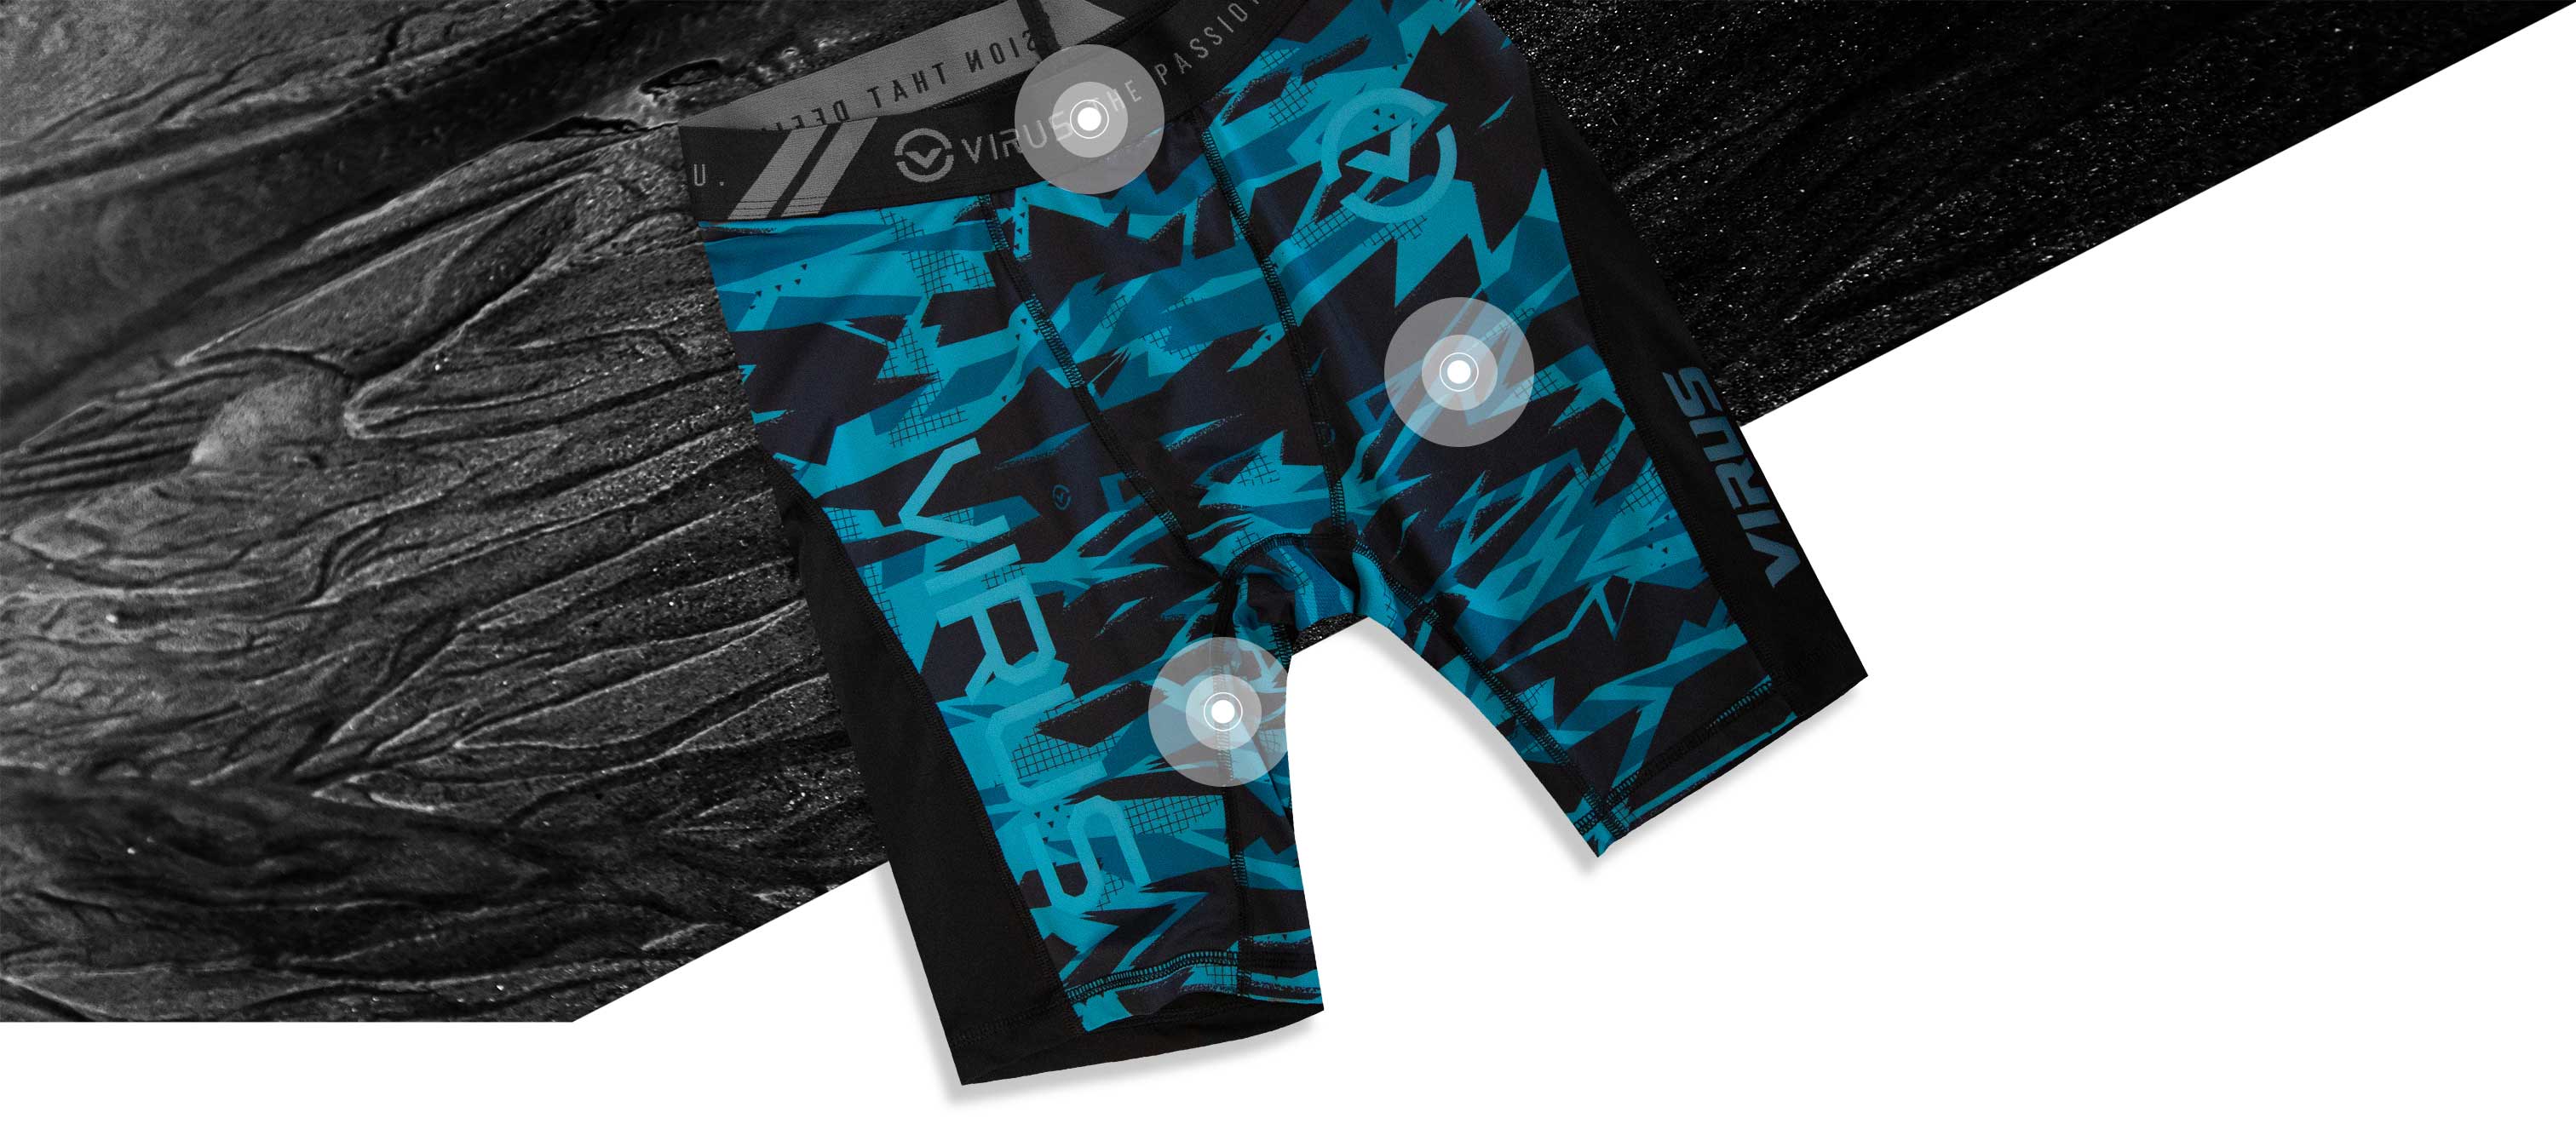 Virus Performance - These Limited Edition Co14.5 Compression Shorts are  almost gone. Link in bio. — @virusintl #virusintl #thepassionthatdefinesyou